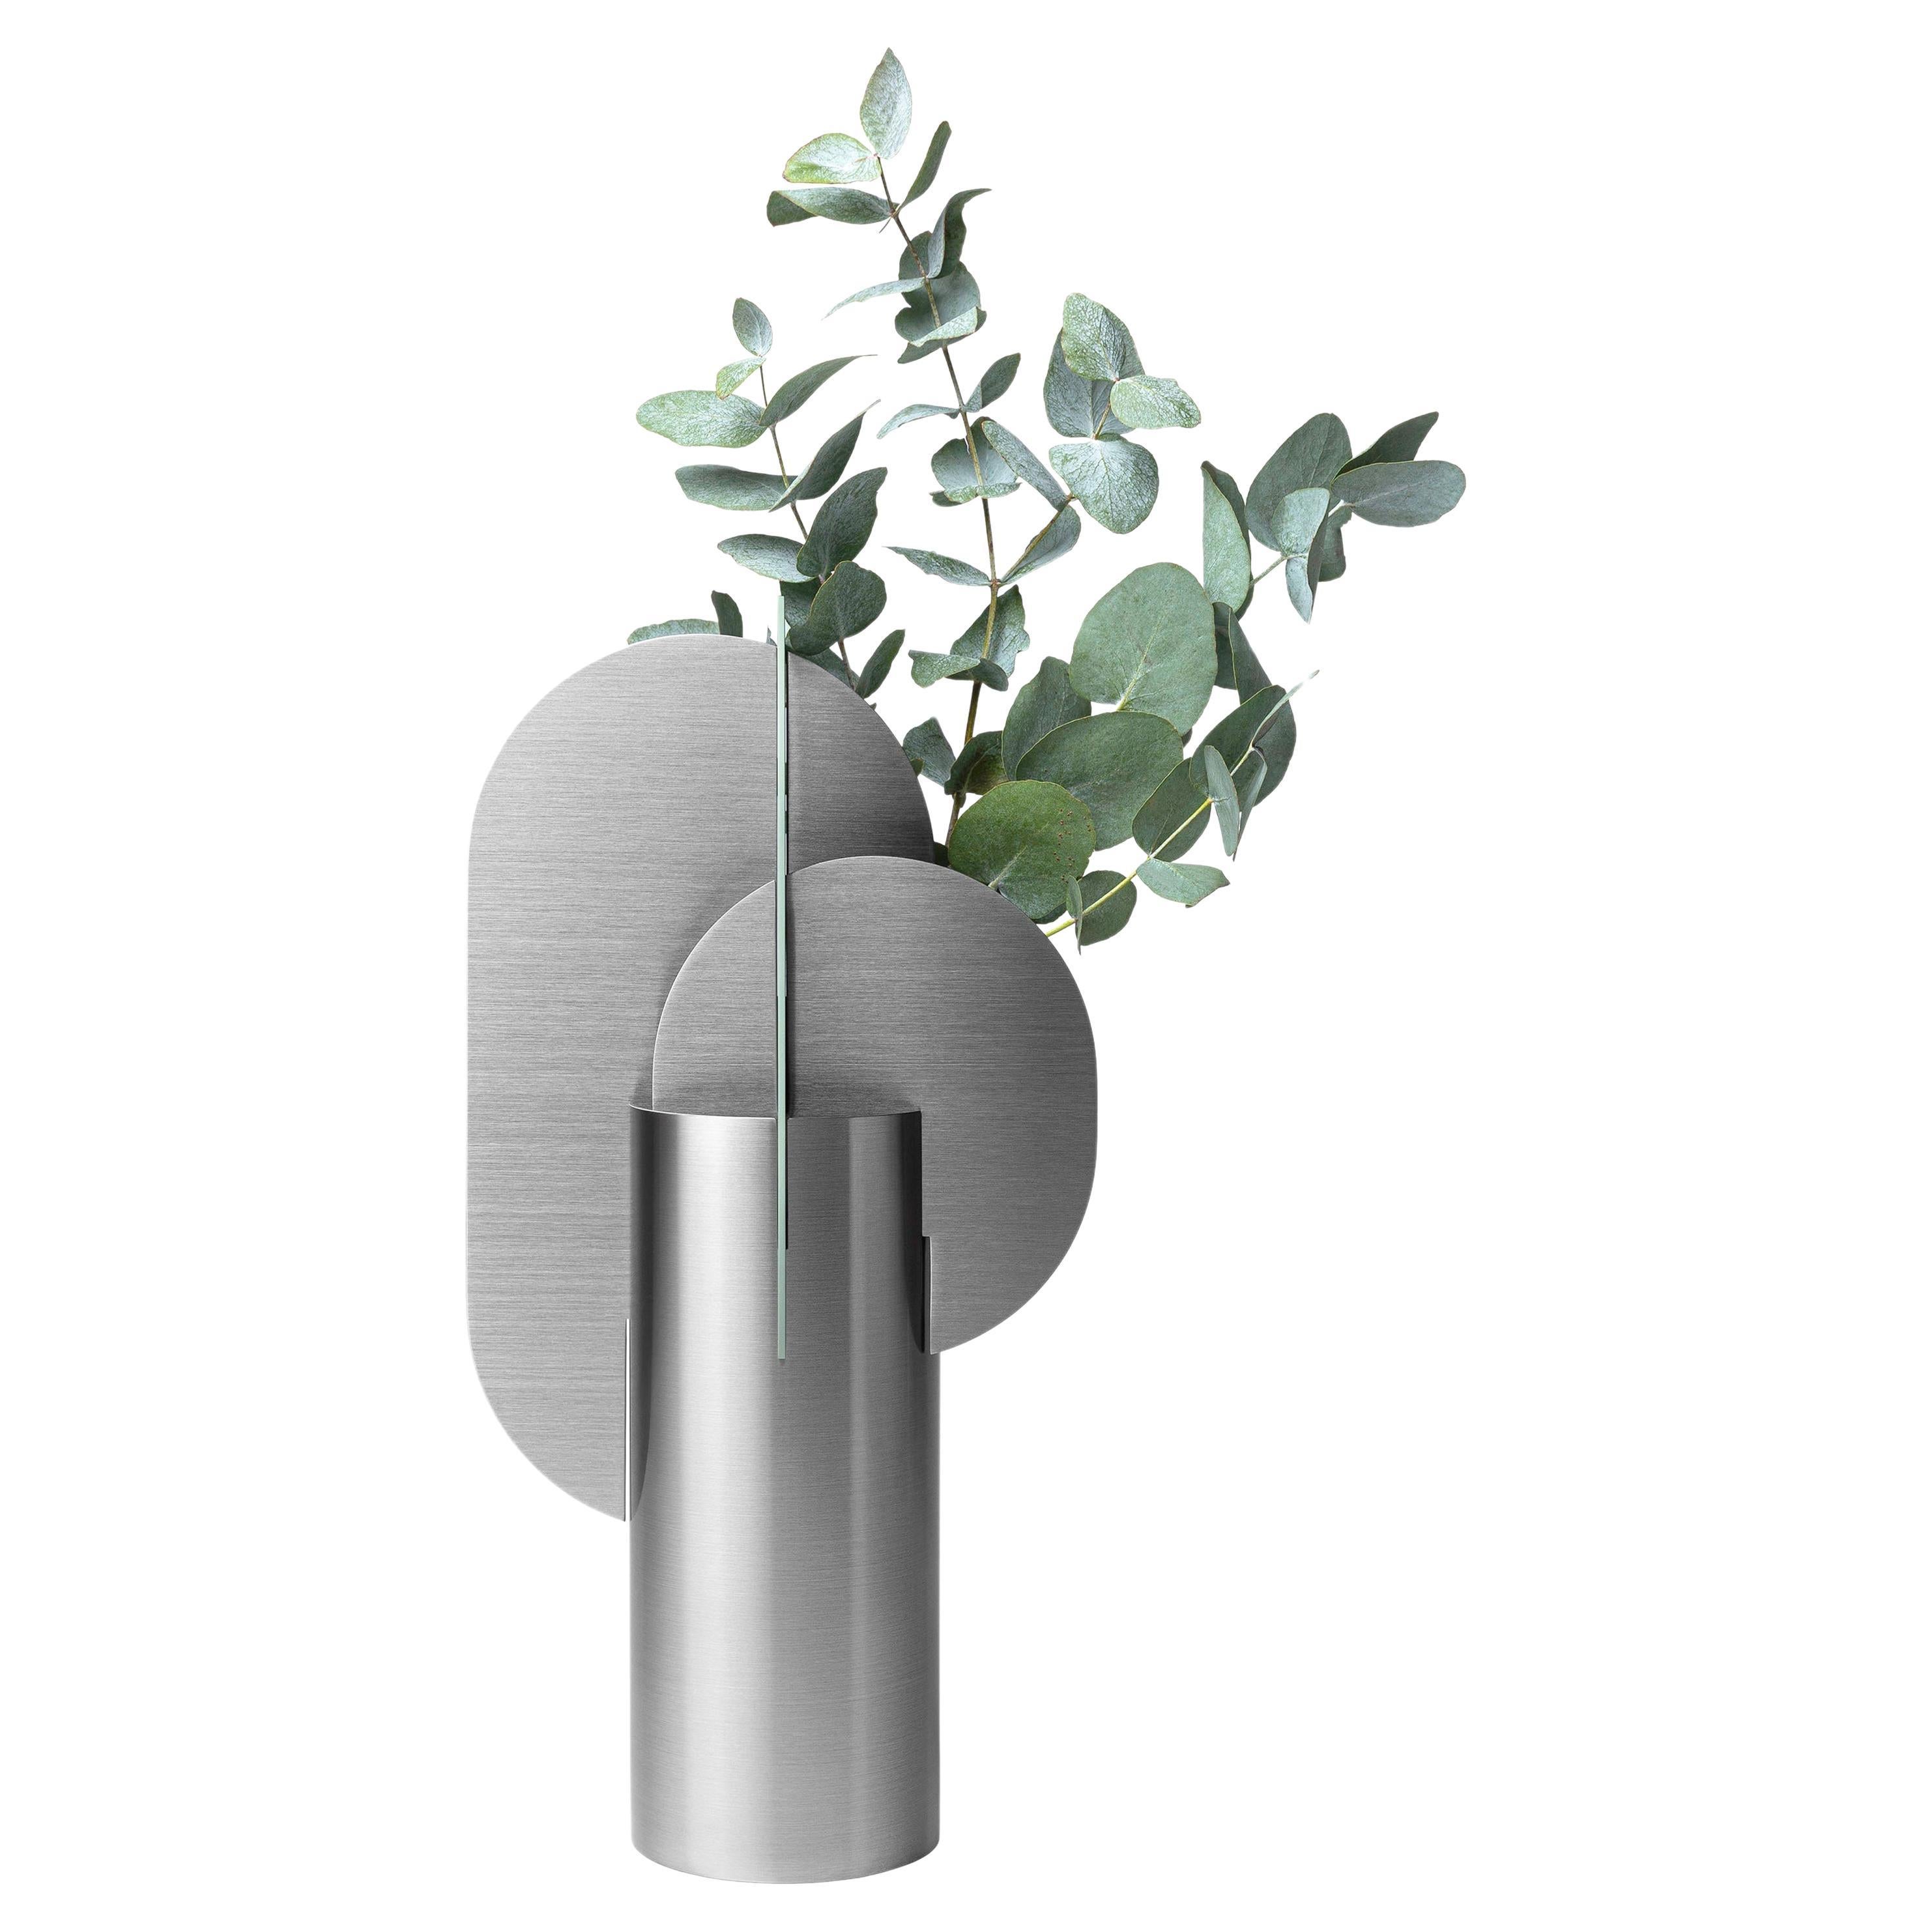 Contemporary Metal Vase 'Ekster CS11' by Noom, Brushed Stainless Steel For Sale